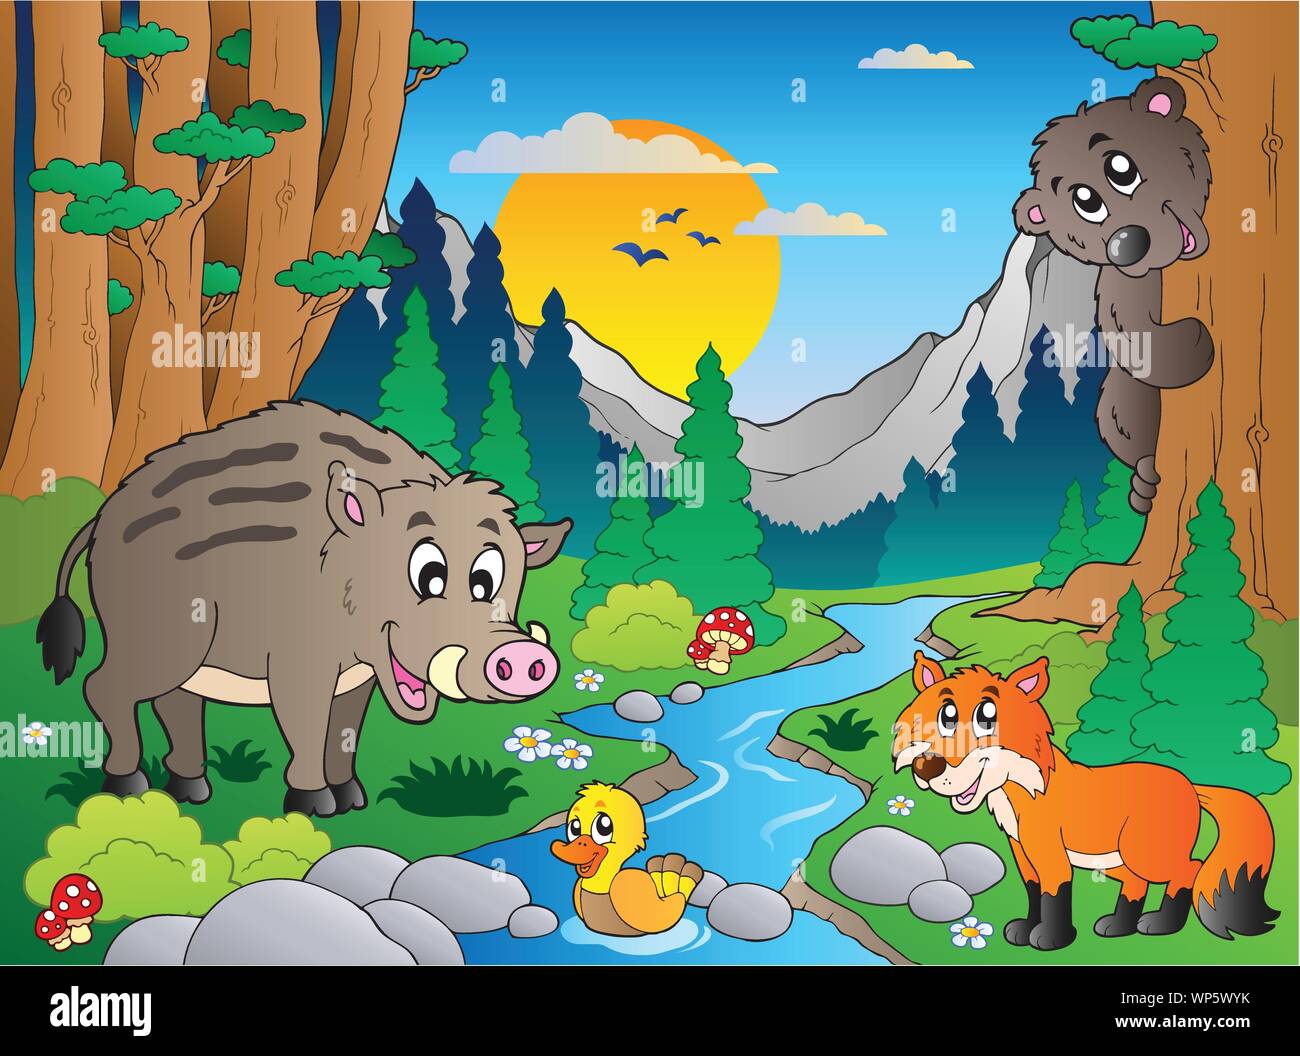 Forest scene with various animals 3 Stock Vector